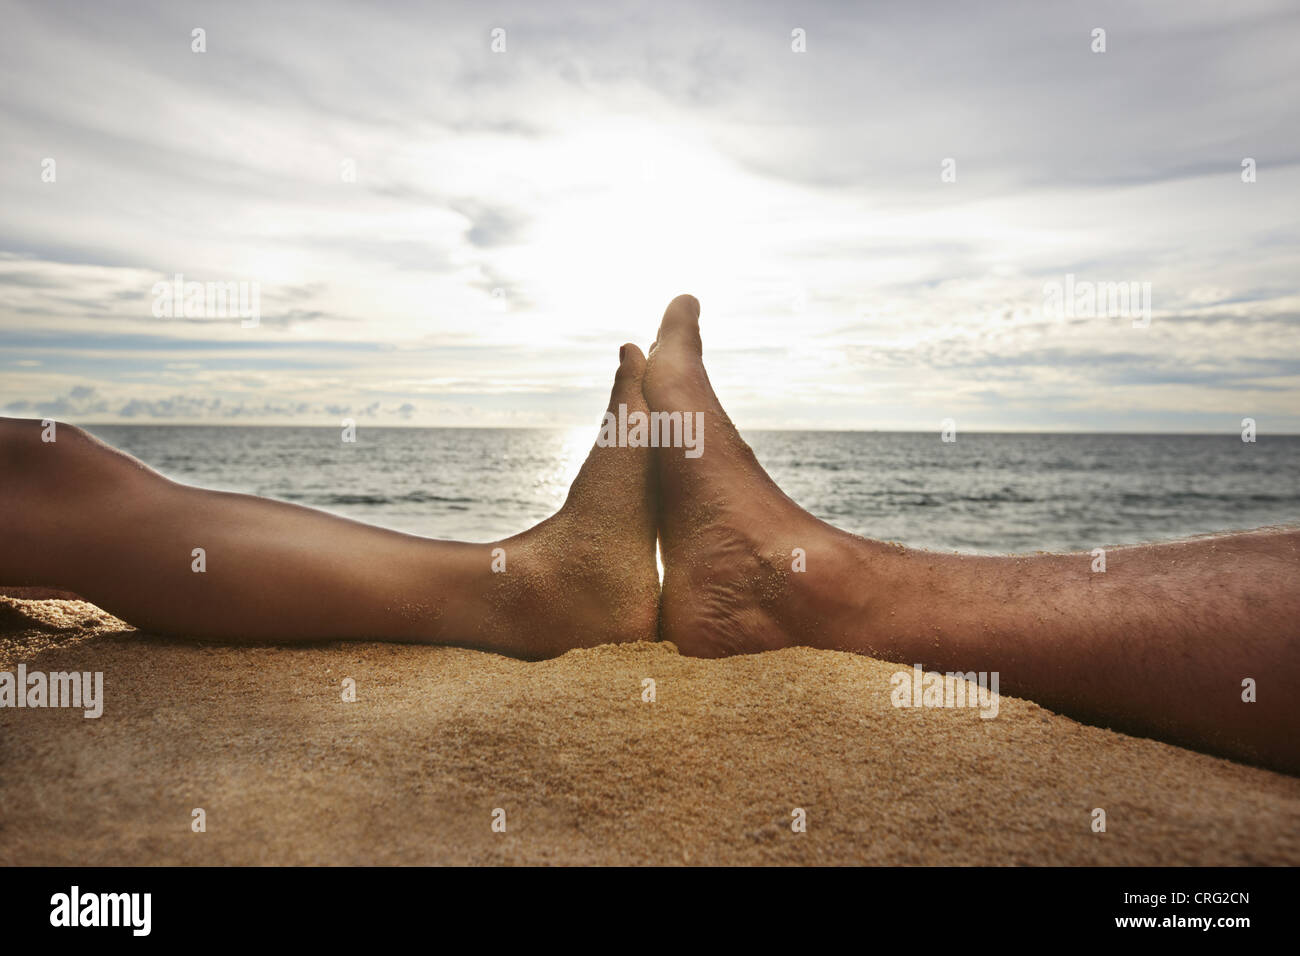 Close up of pieds touchant on beach Banque D'Images